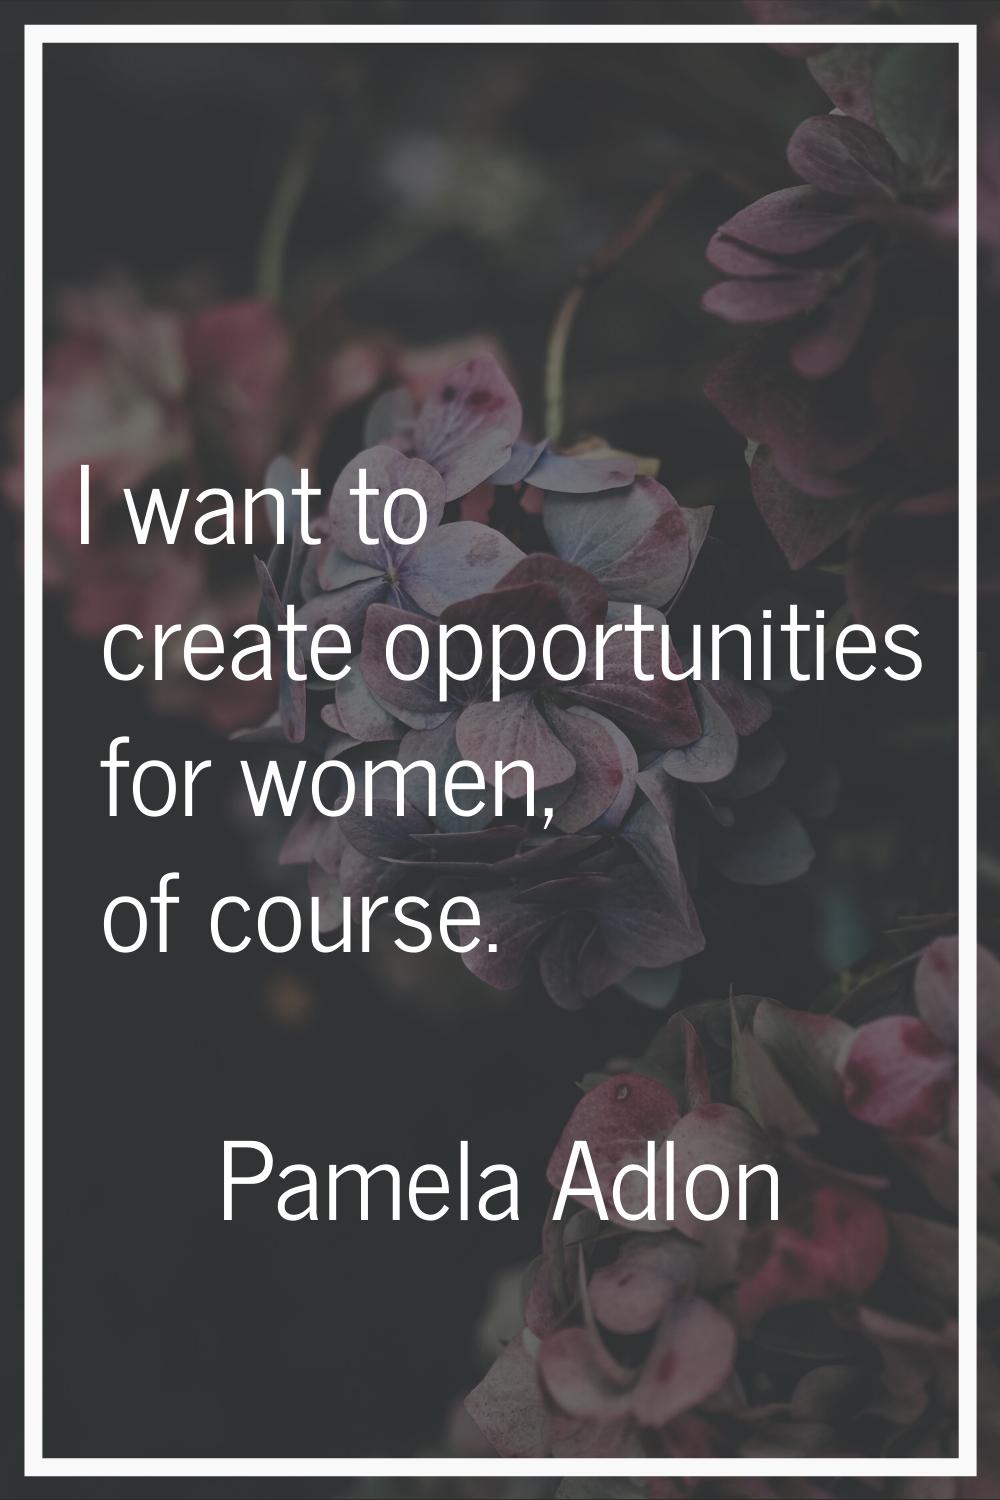 I want to create opportunities for women, of course.